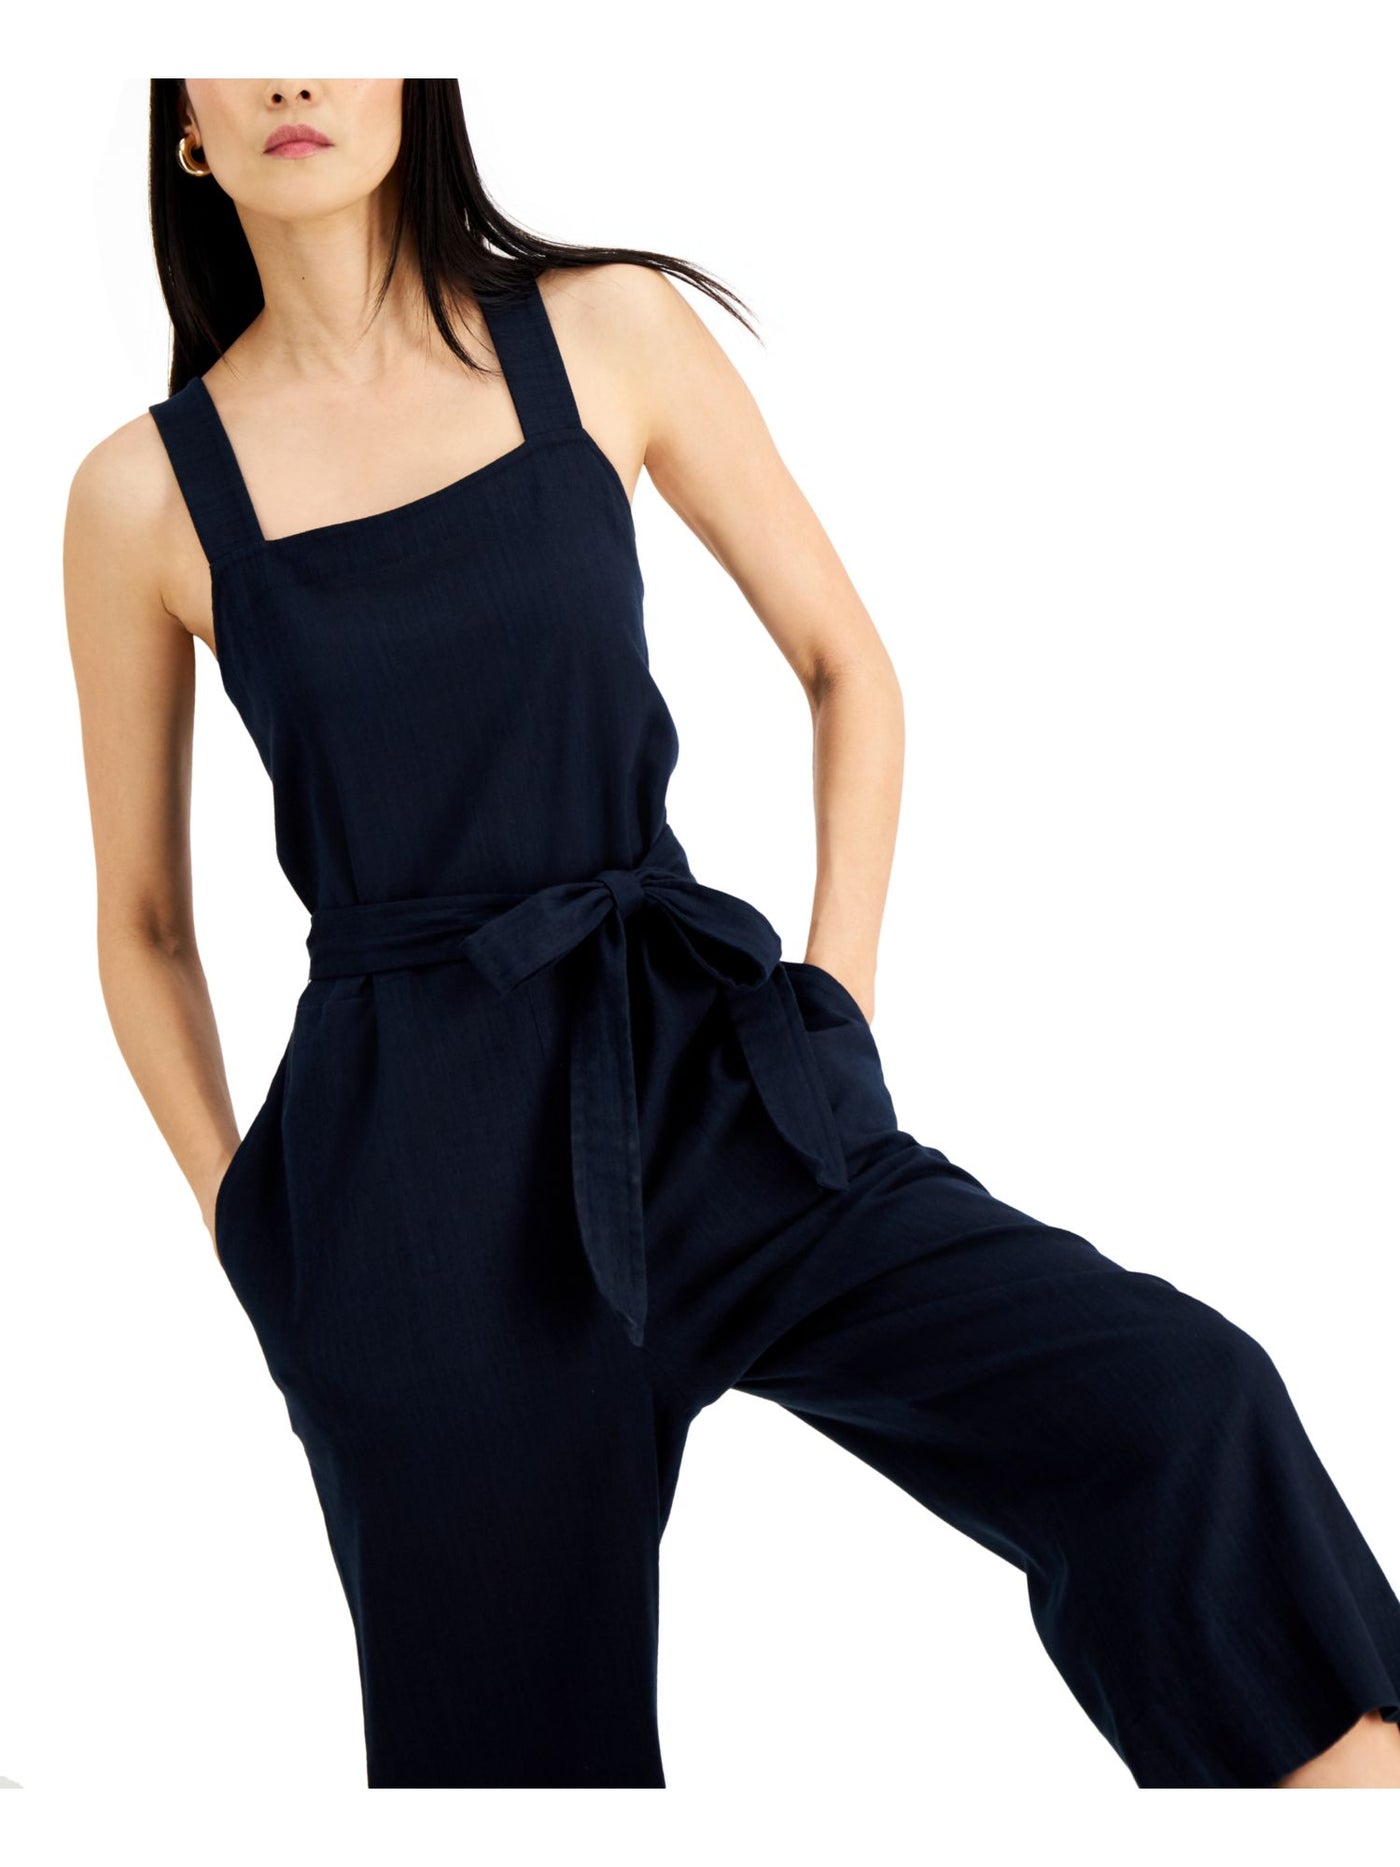 INC Womens Navy Pocketed Belted Unlined Sleeveless Square Neck Wide Leg Jumpsuit 12